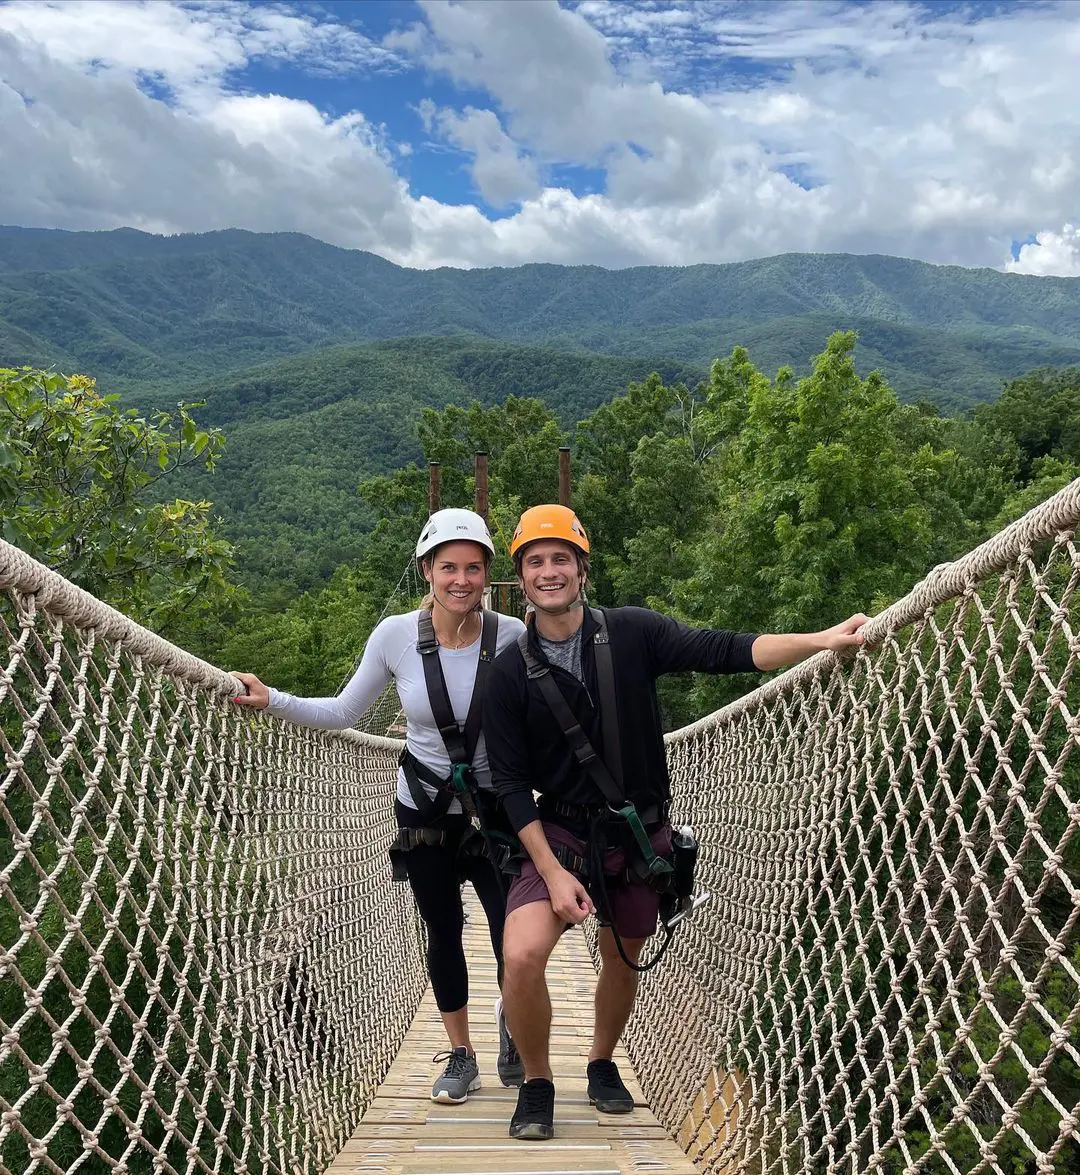 Shelby Rogers John Slavs up for a mountain climbing near Chimney Tops Trail in July 2021